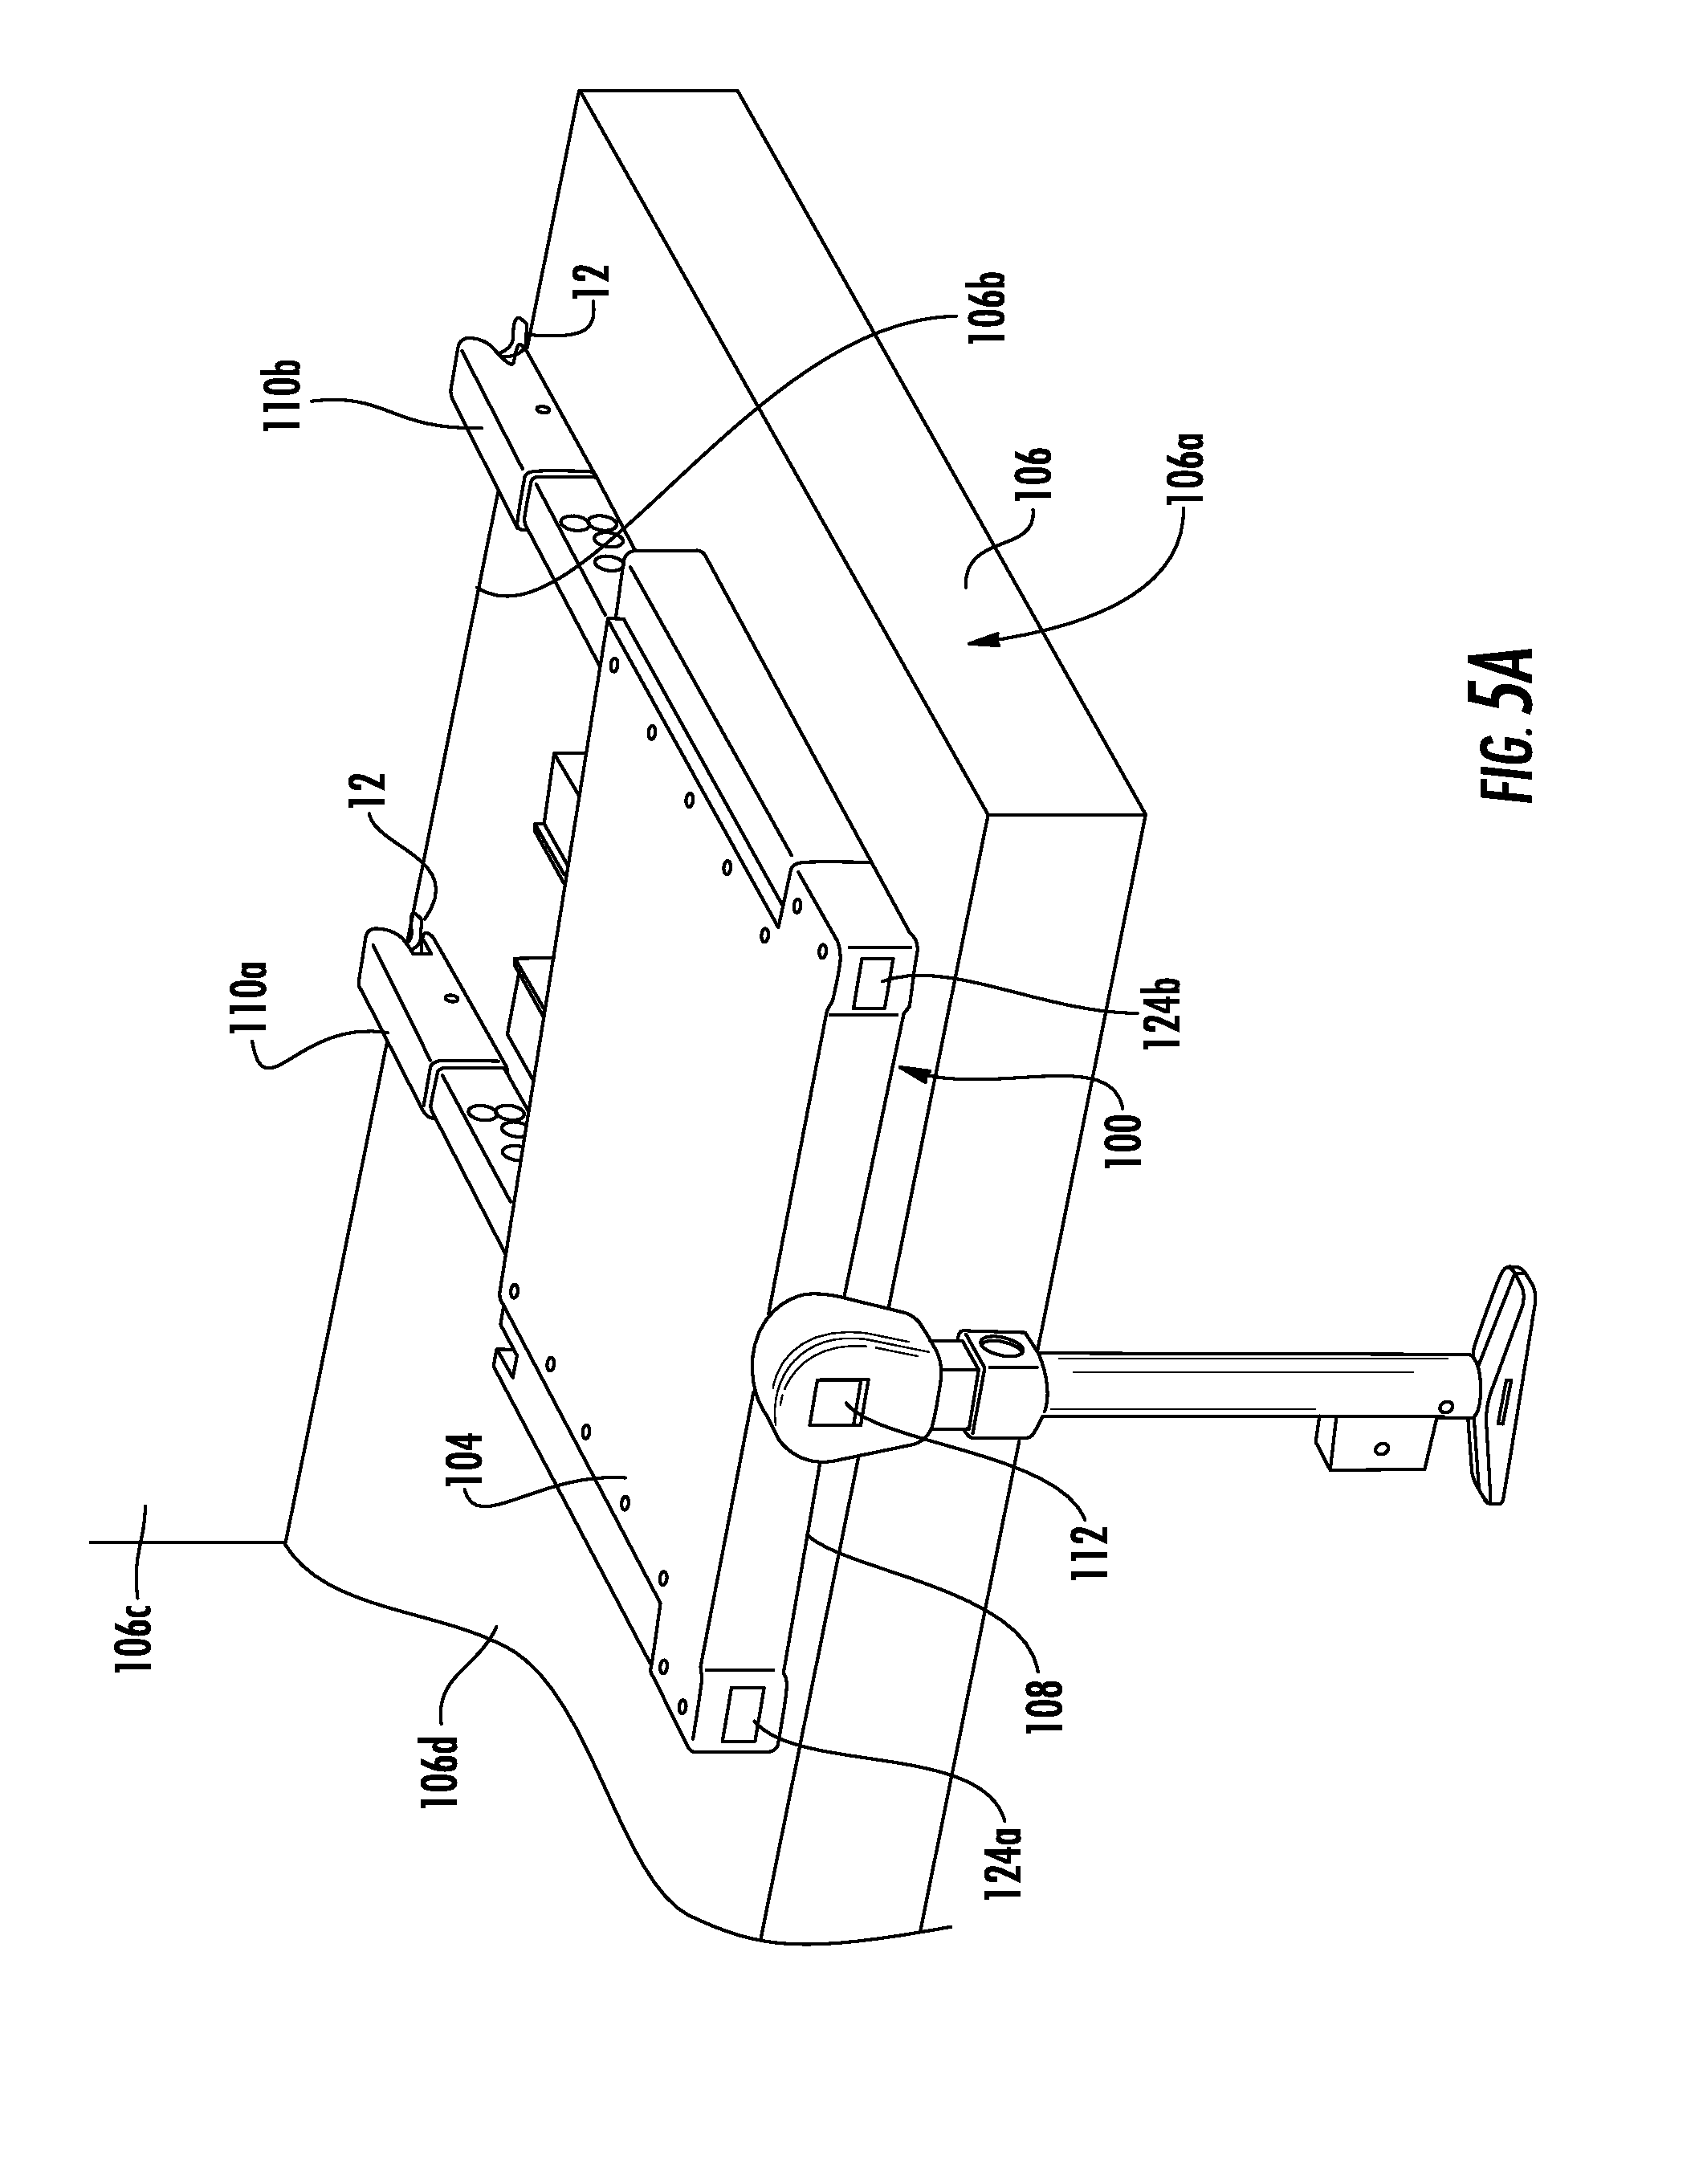 Coupling device for securing a child car seat to a vehicle